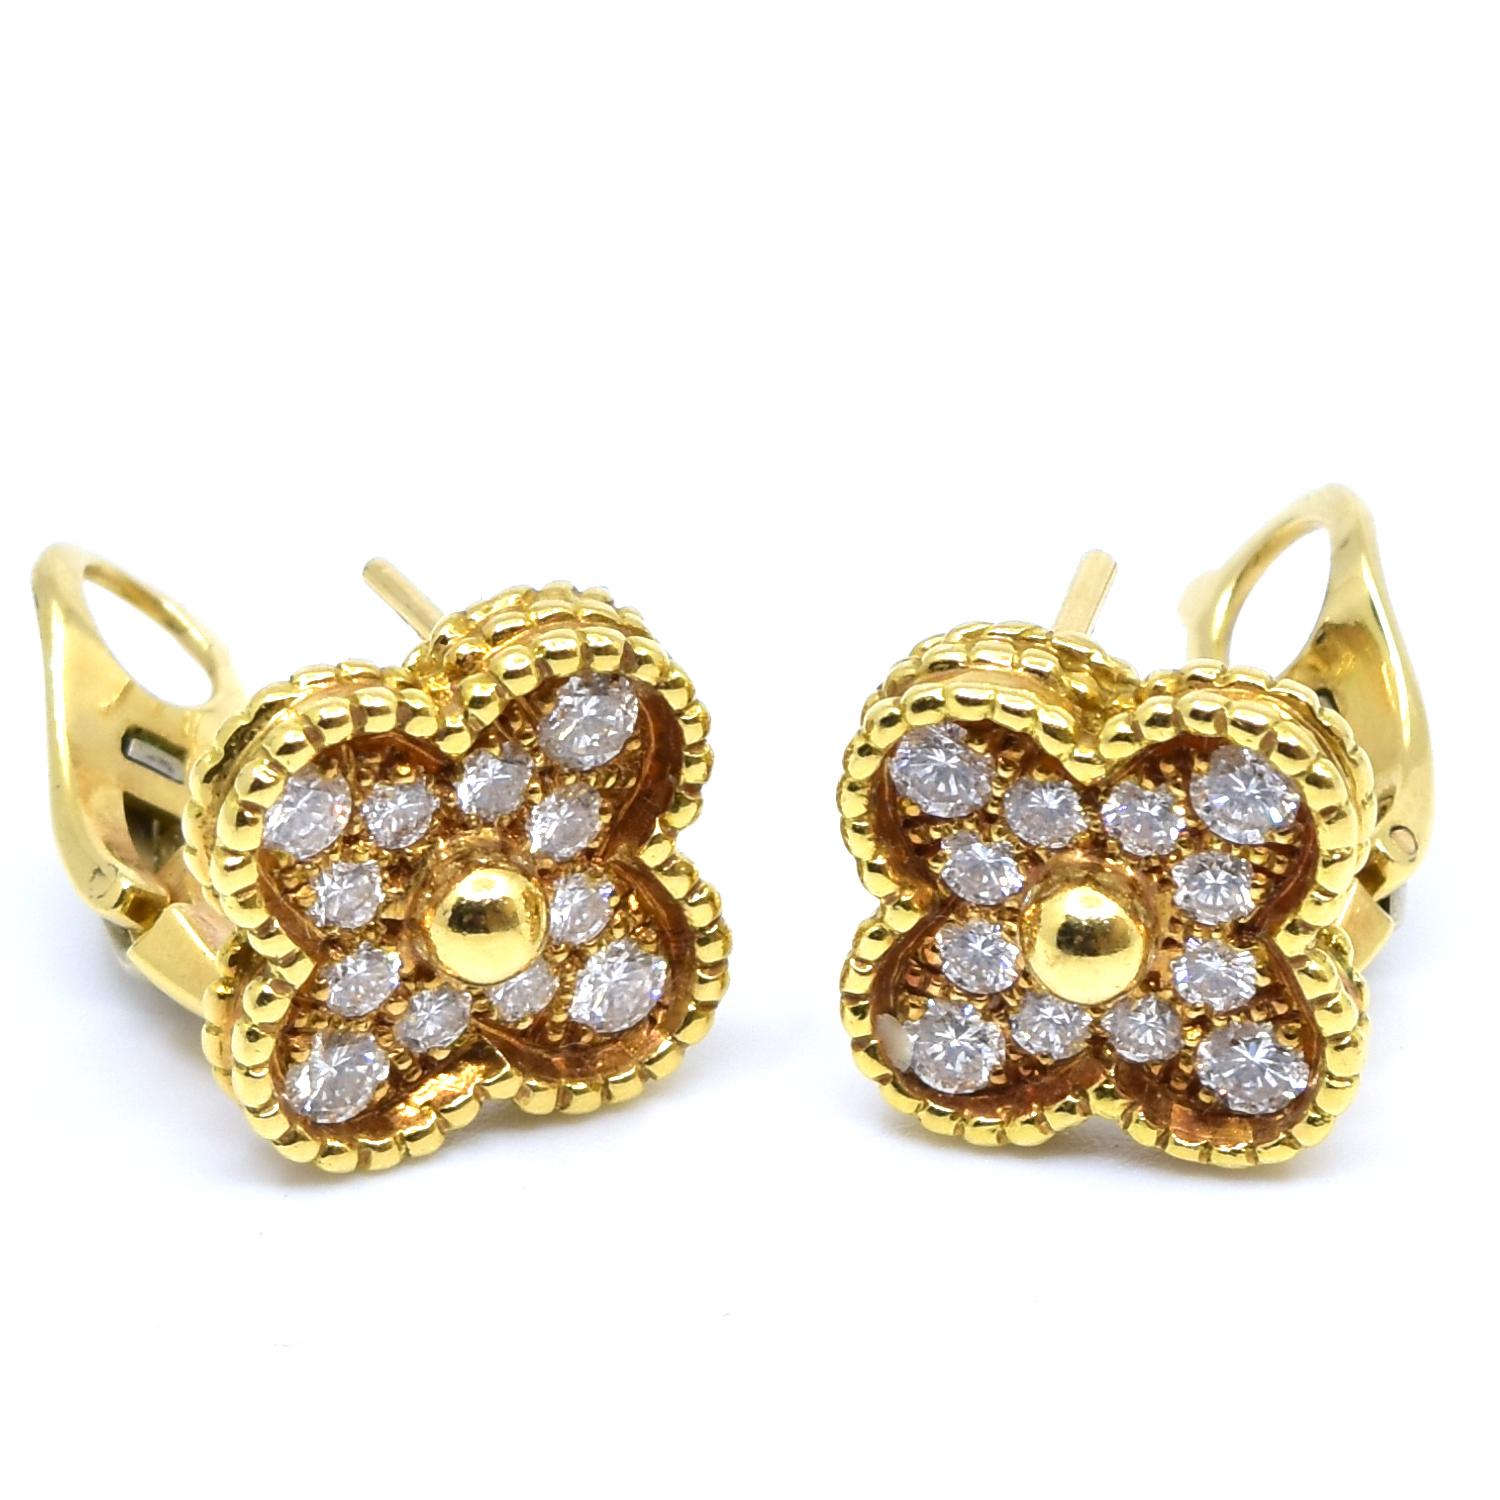 Designer: Van Cleef & Arpels

Collection: Vintage Alhambra

Style: Stud Earrings

Metal Type: Yellow Gold

Metal Purity: 18k​​​​​​​

Stones: 24 Round Brilliant Cut Diamonds

Diamond Color: D E F

Diamond Clarity: IF to VVS​​​​​​​

​Includes: VCA